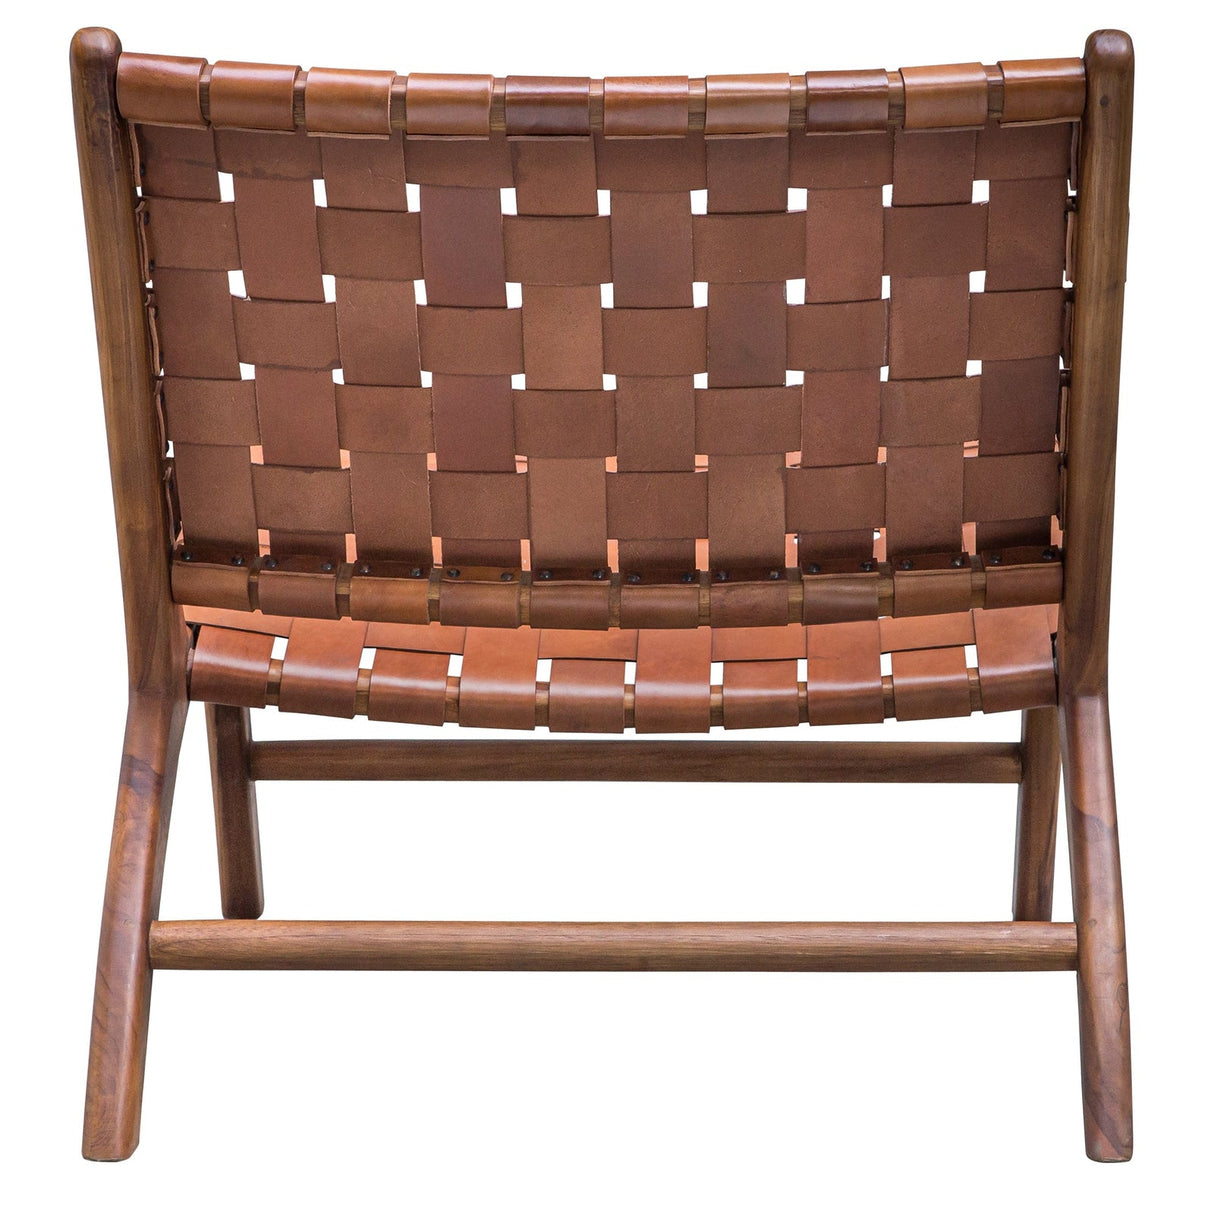 Uttermost Plait Woven Leather Accent Chair - Home Elegance USA